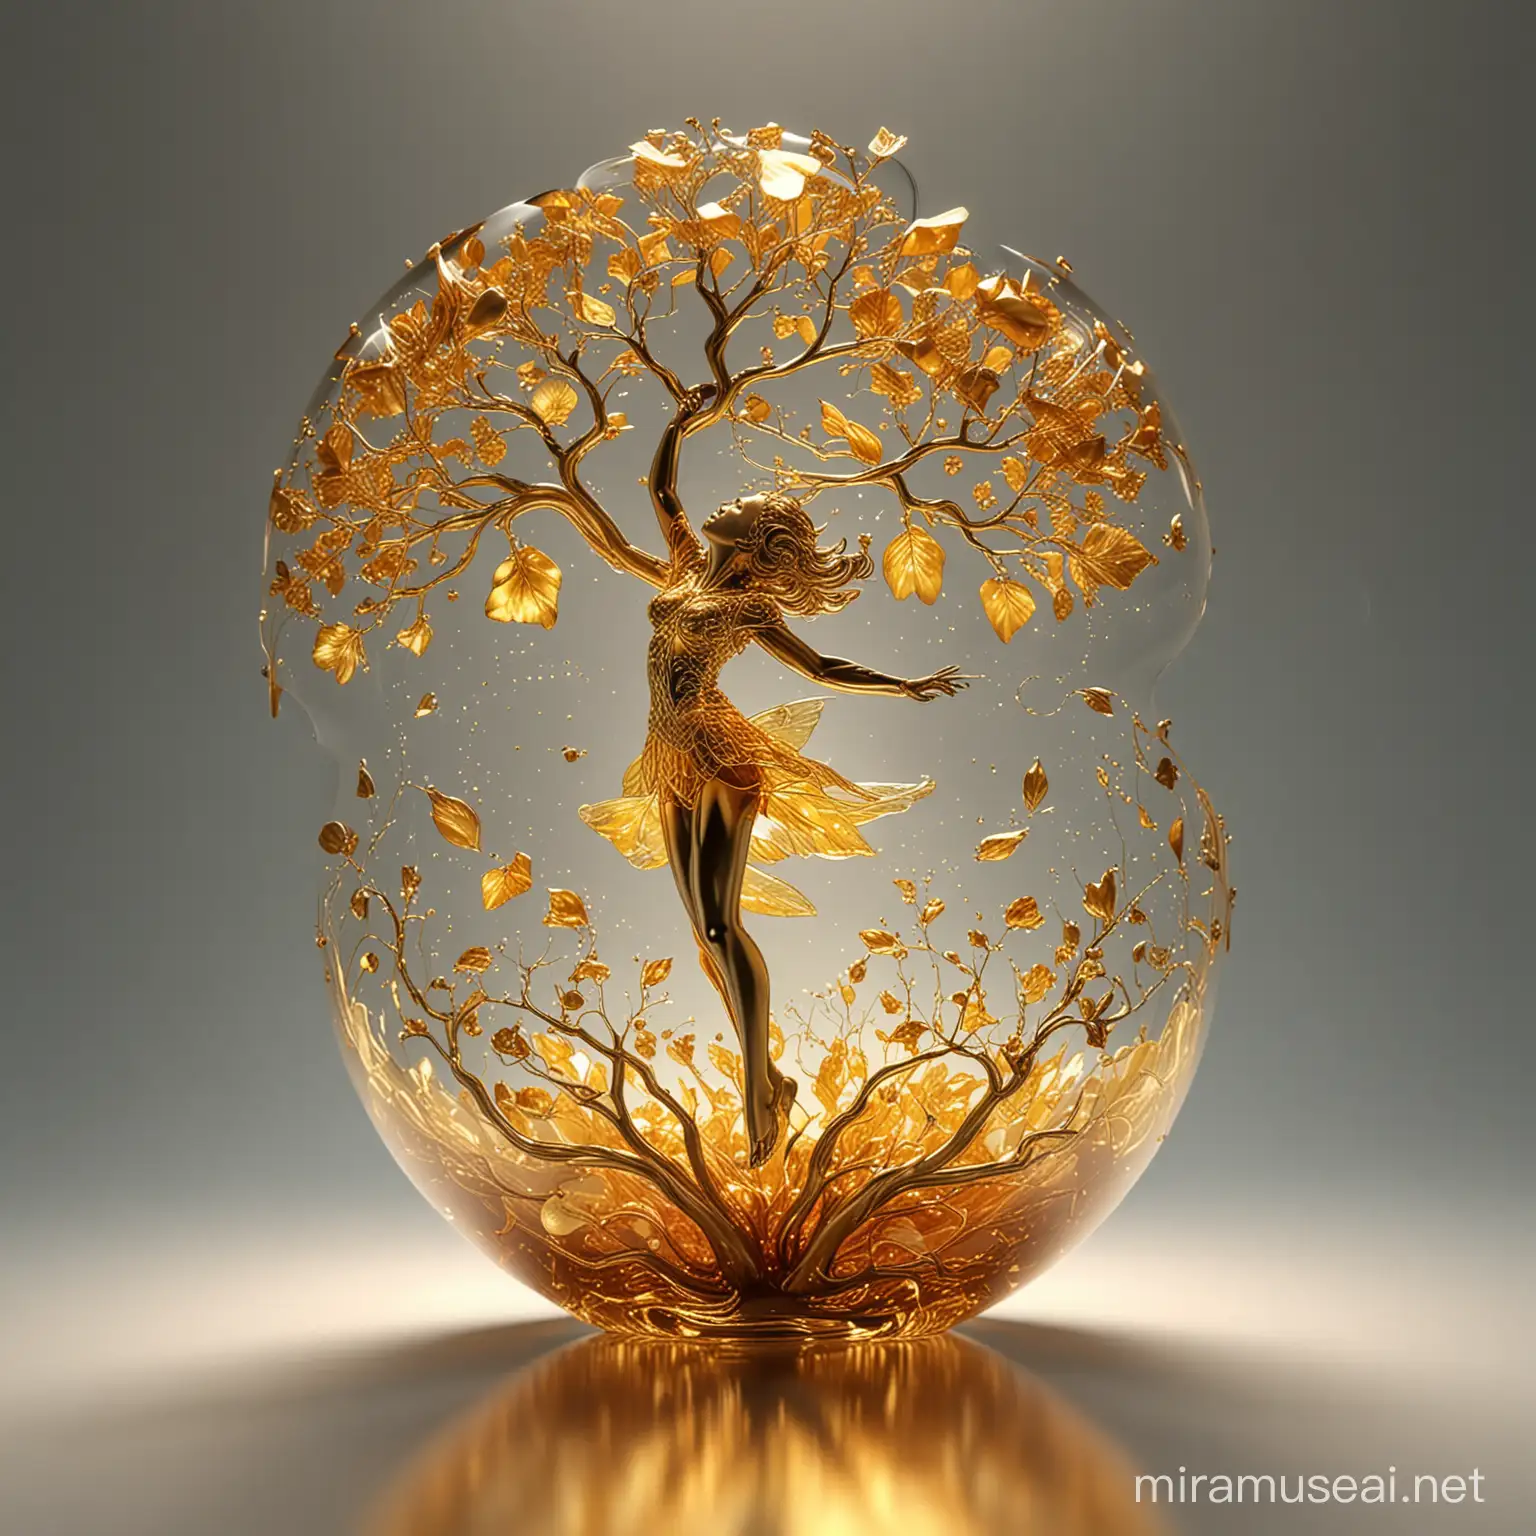 photograph, photorealistic, ultra-realistic, intricately detailed, wide angle, fine fractal glossy vivid colored shiny contours outlines of a glass apple with a ("a glowing golden flying female fairy uses her wand to transform a tree to solid gold.") inside, surreal, gradient, windy, petals floating on the wind, swirling ribbons of ink and light. linquivera, liiv1 high quality UHD